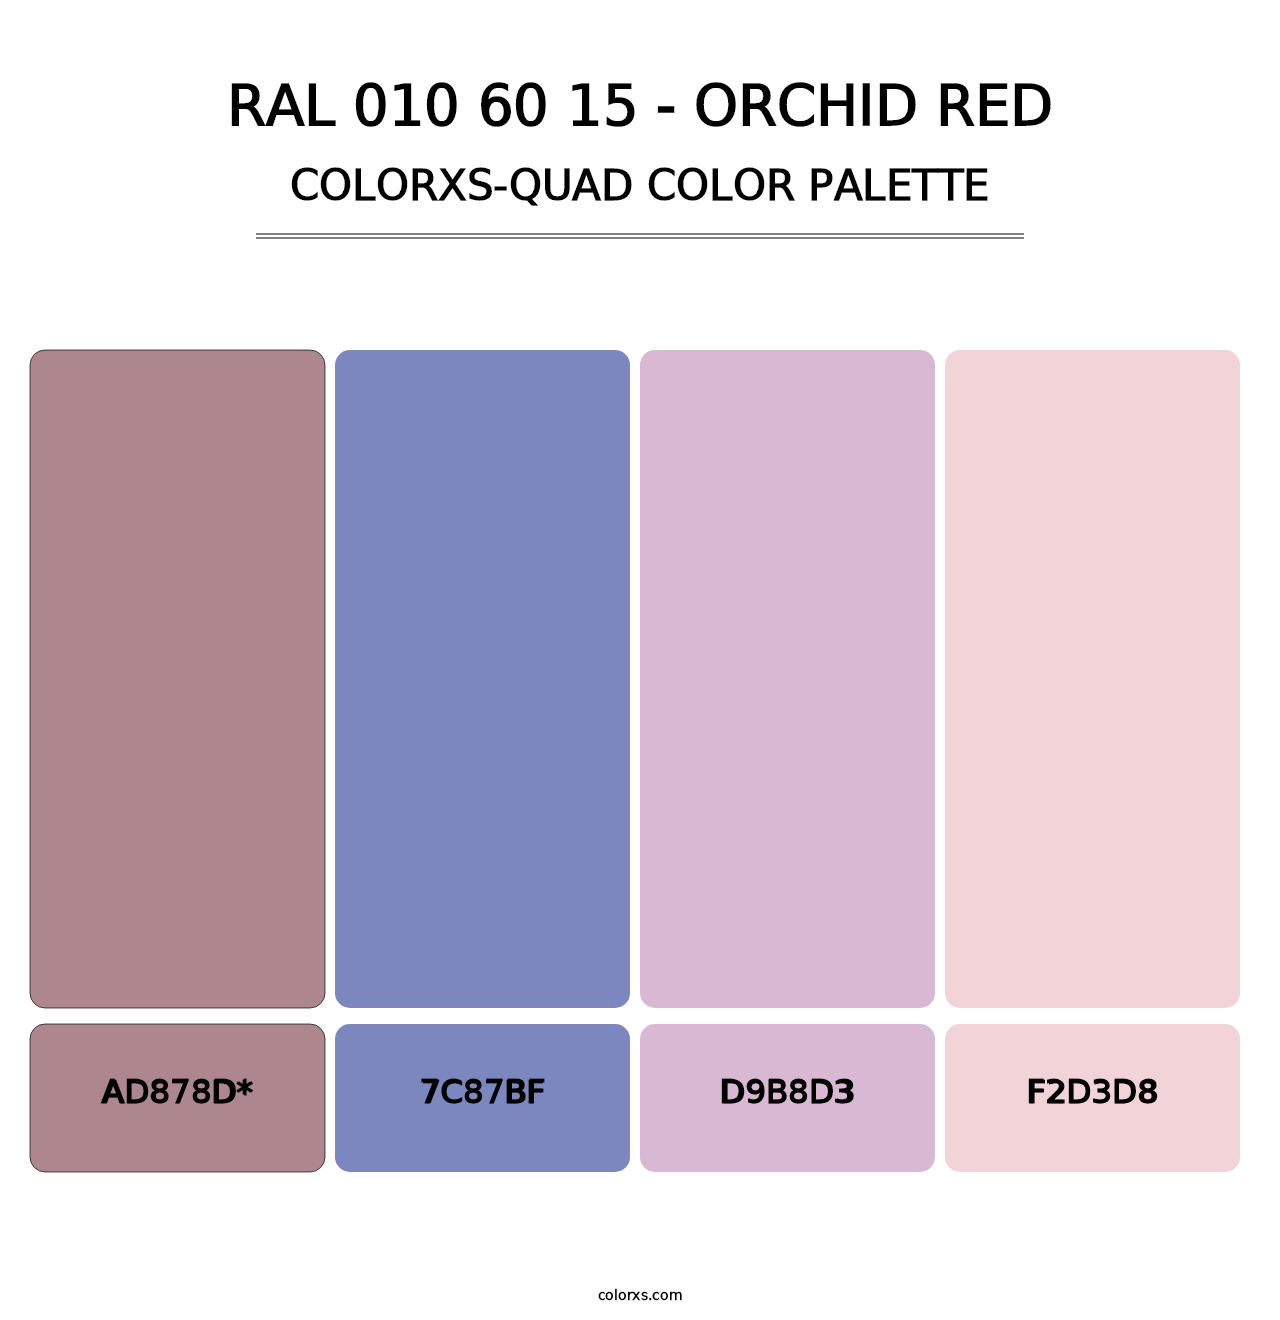 RAL 010 60 15 - Orchid Red - Colorxs Quad Palette